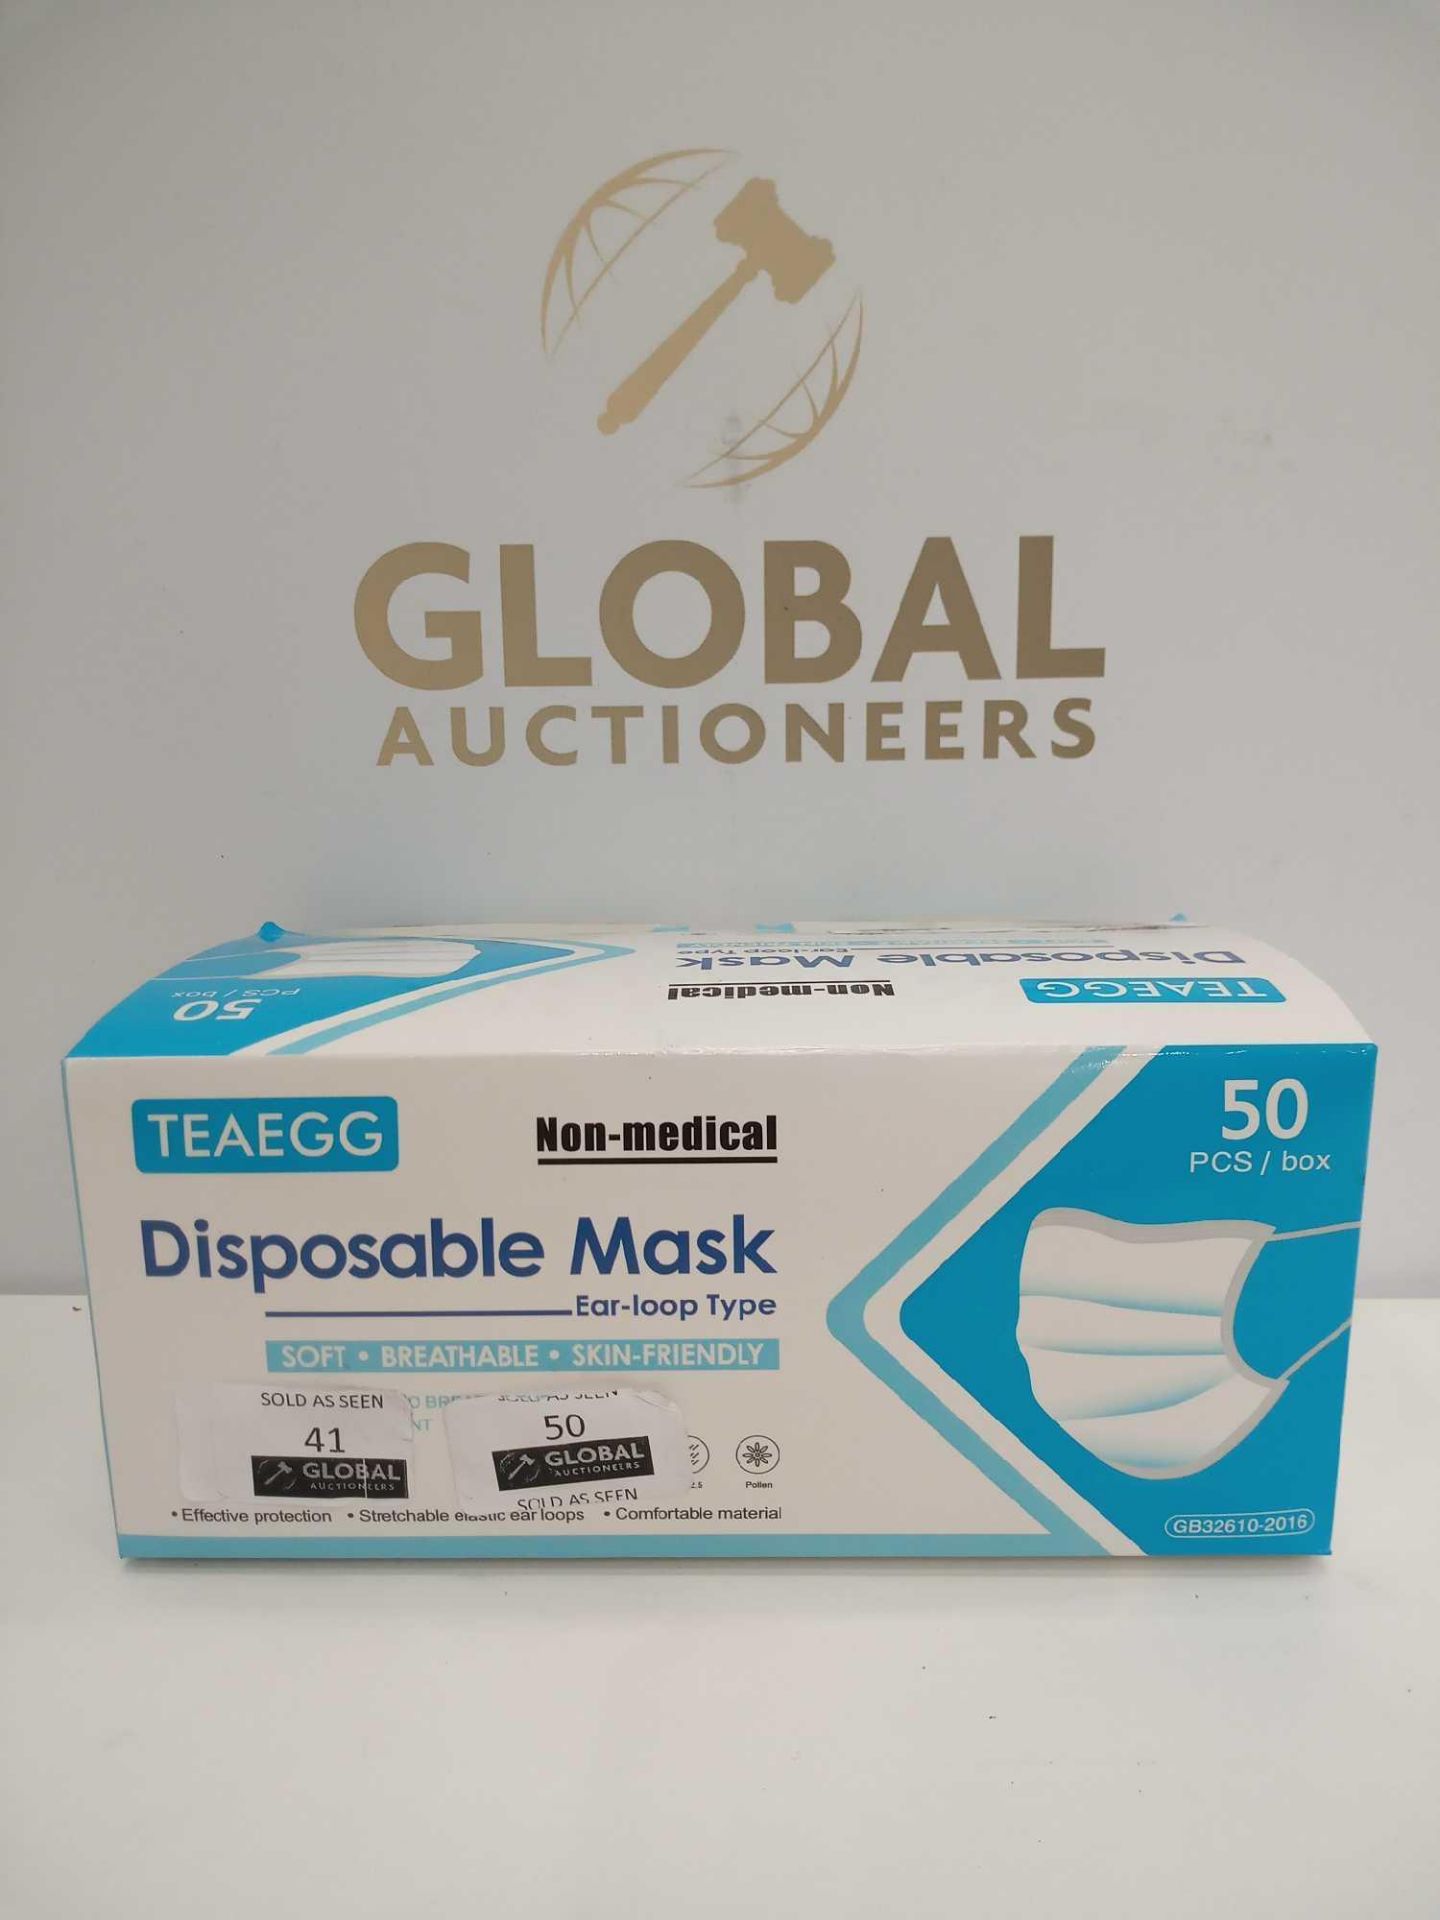 Rrp £300 Box To Contain 50 Brand New Teaegg Non-Medical 3-Ply Disposable Dust Masks